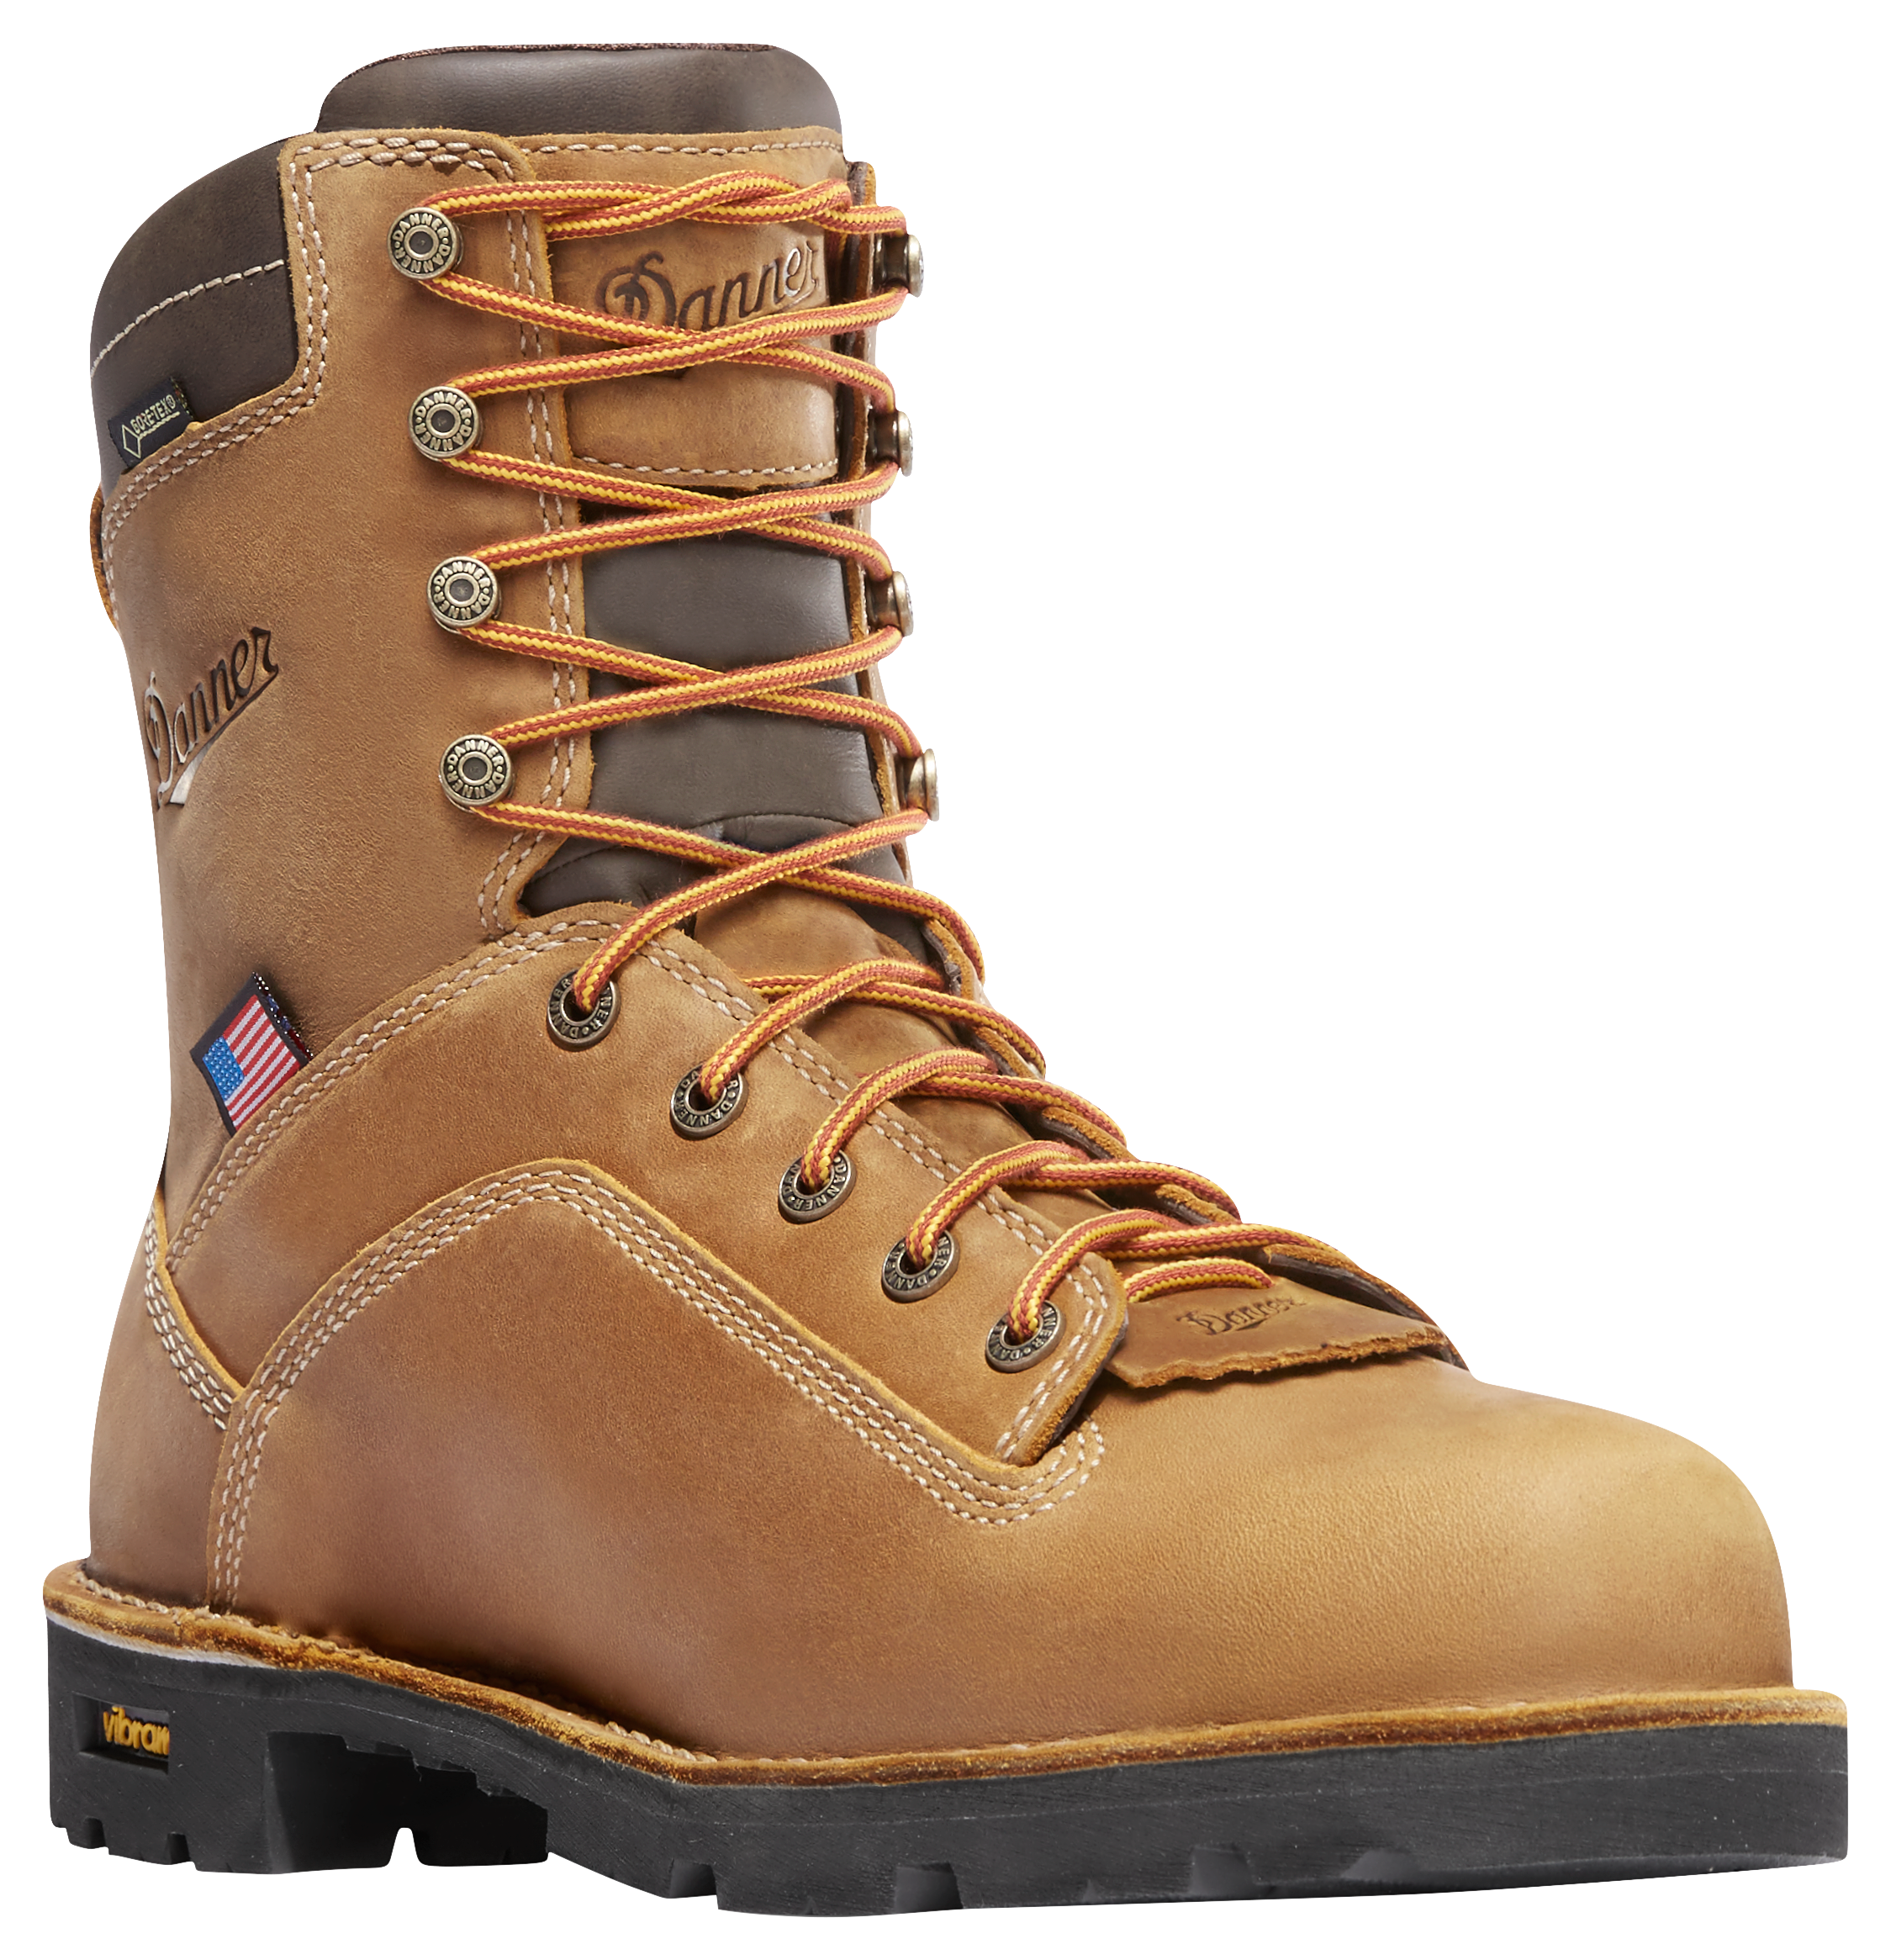 Danner Quarry USA GORE-TEX Insulated Work Boots for Men - Distress Brown - 13M